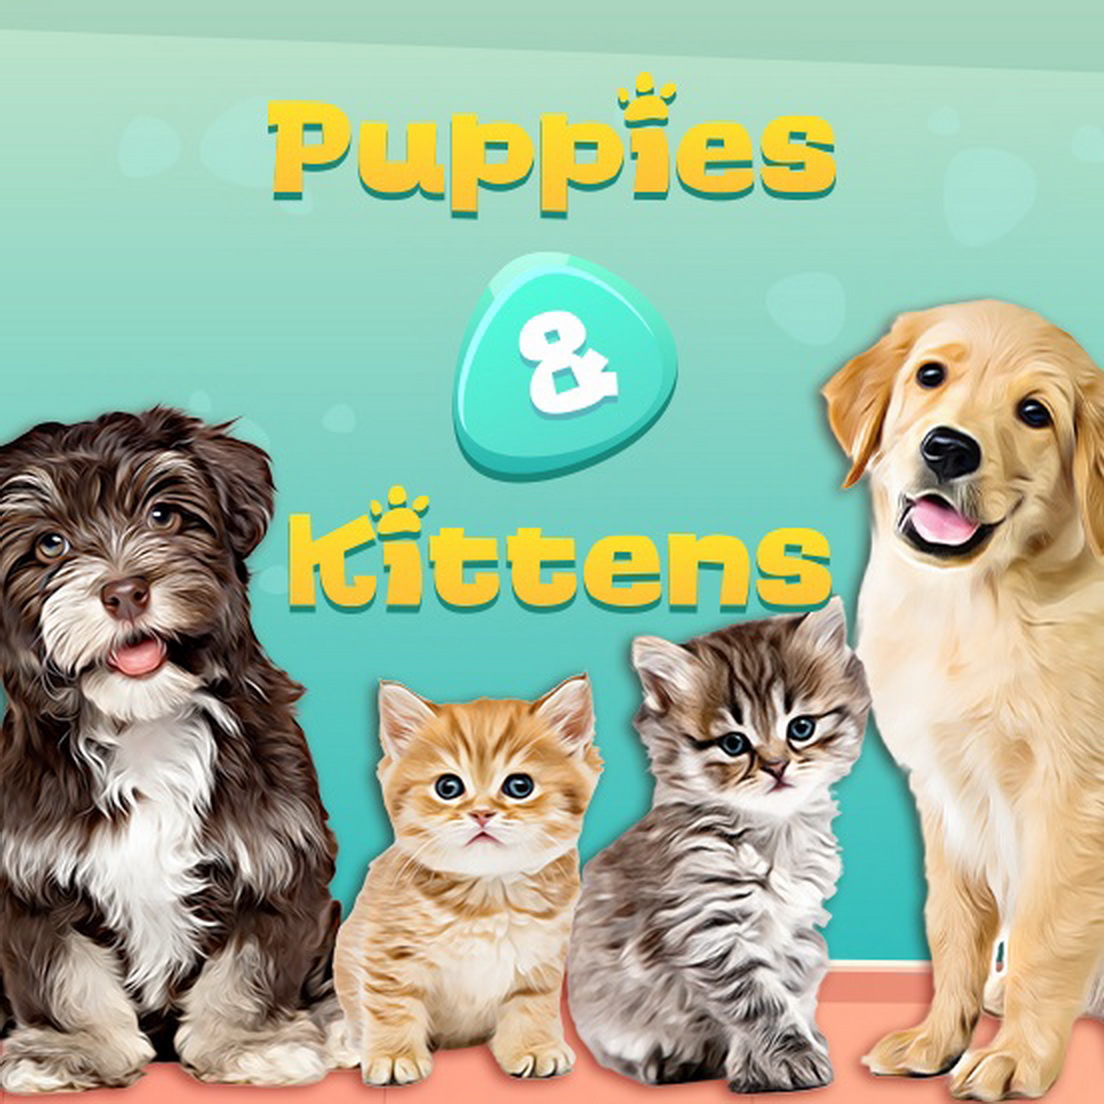 Puppies and Kittens demo